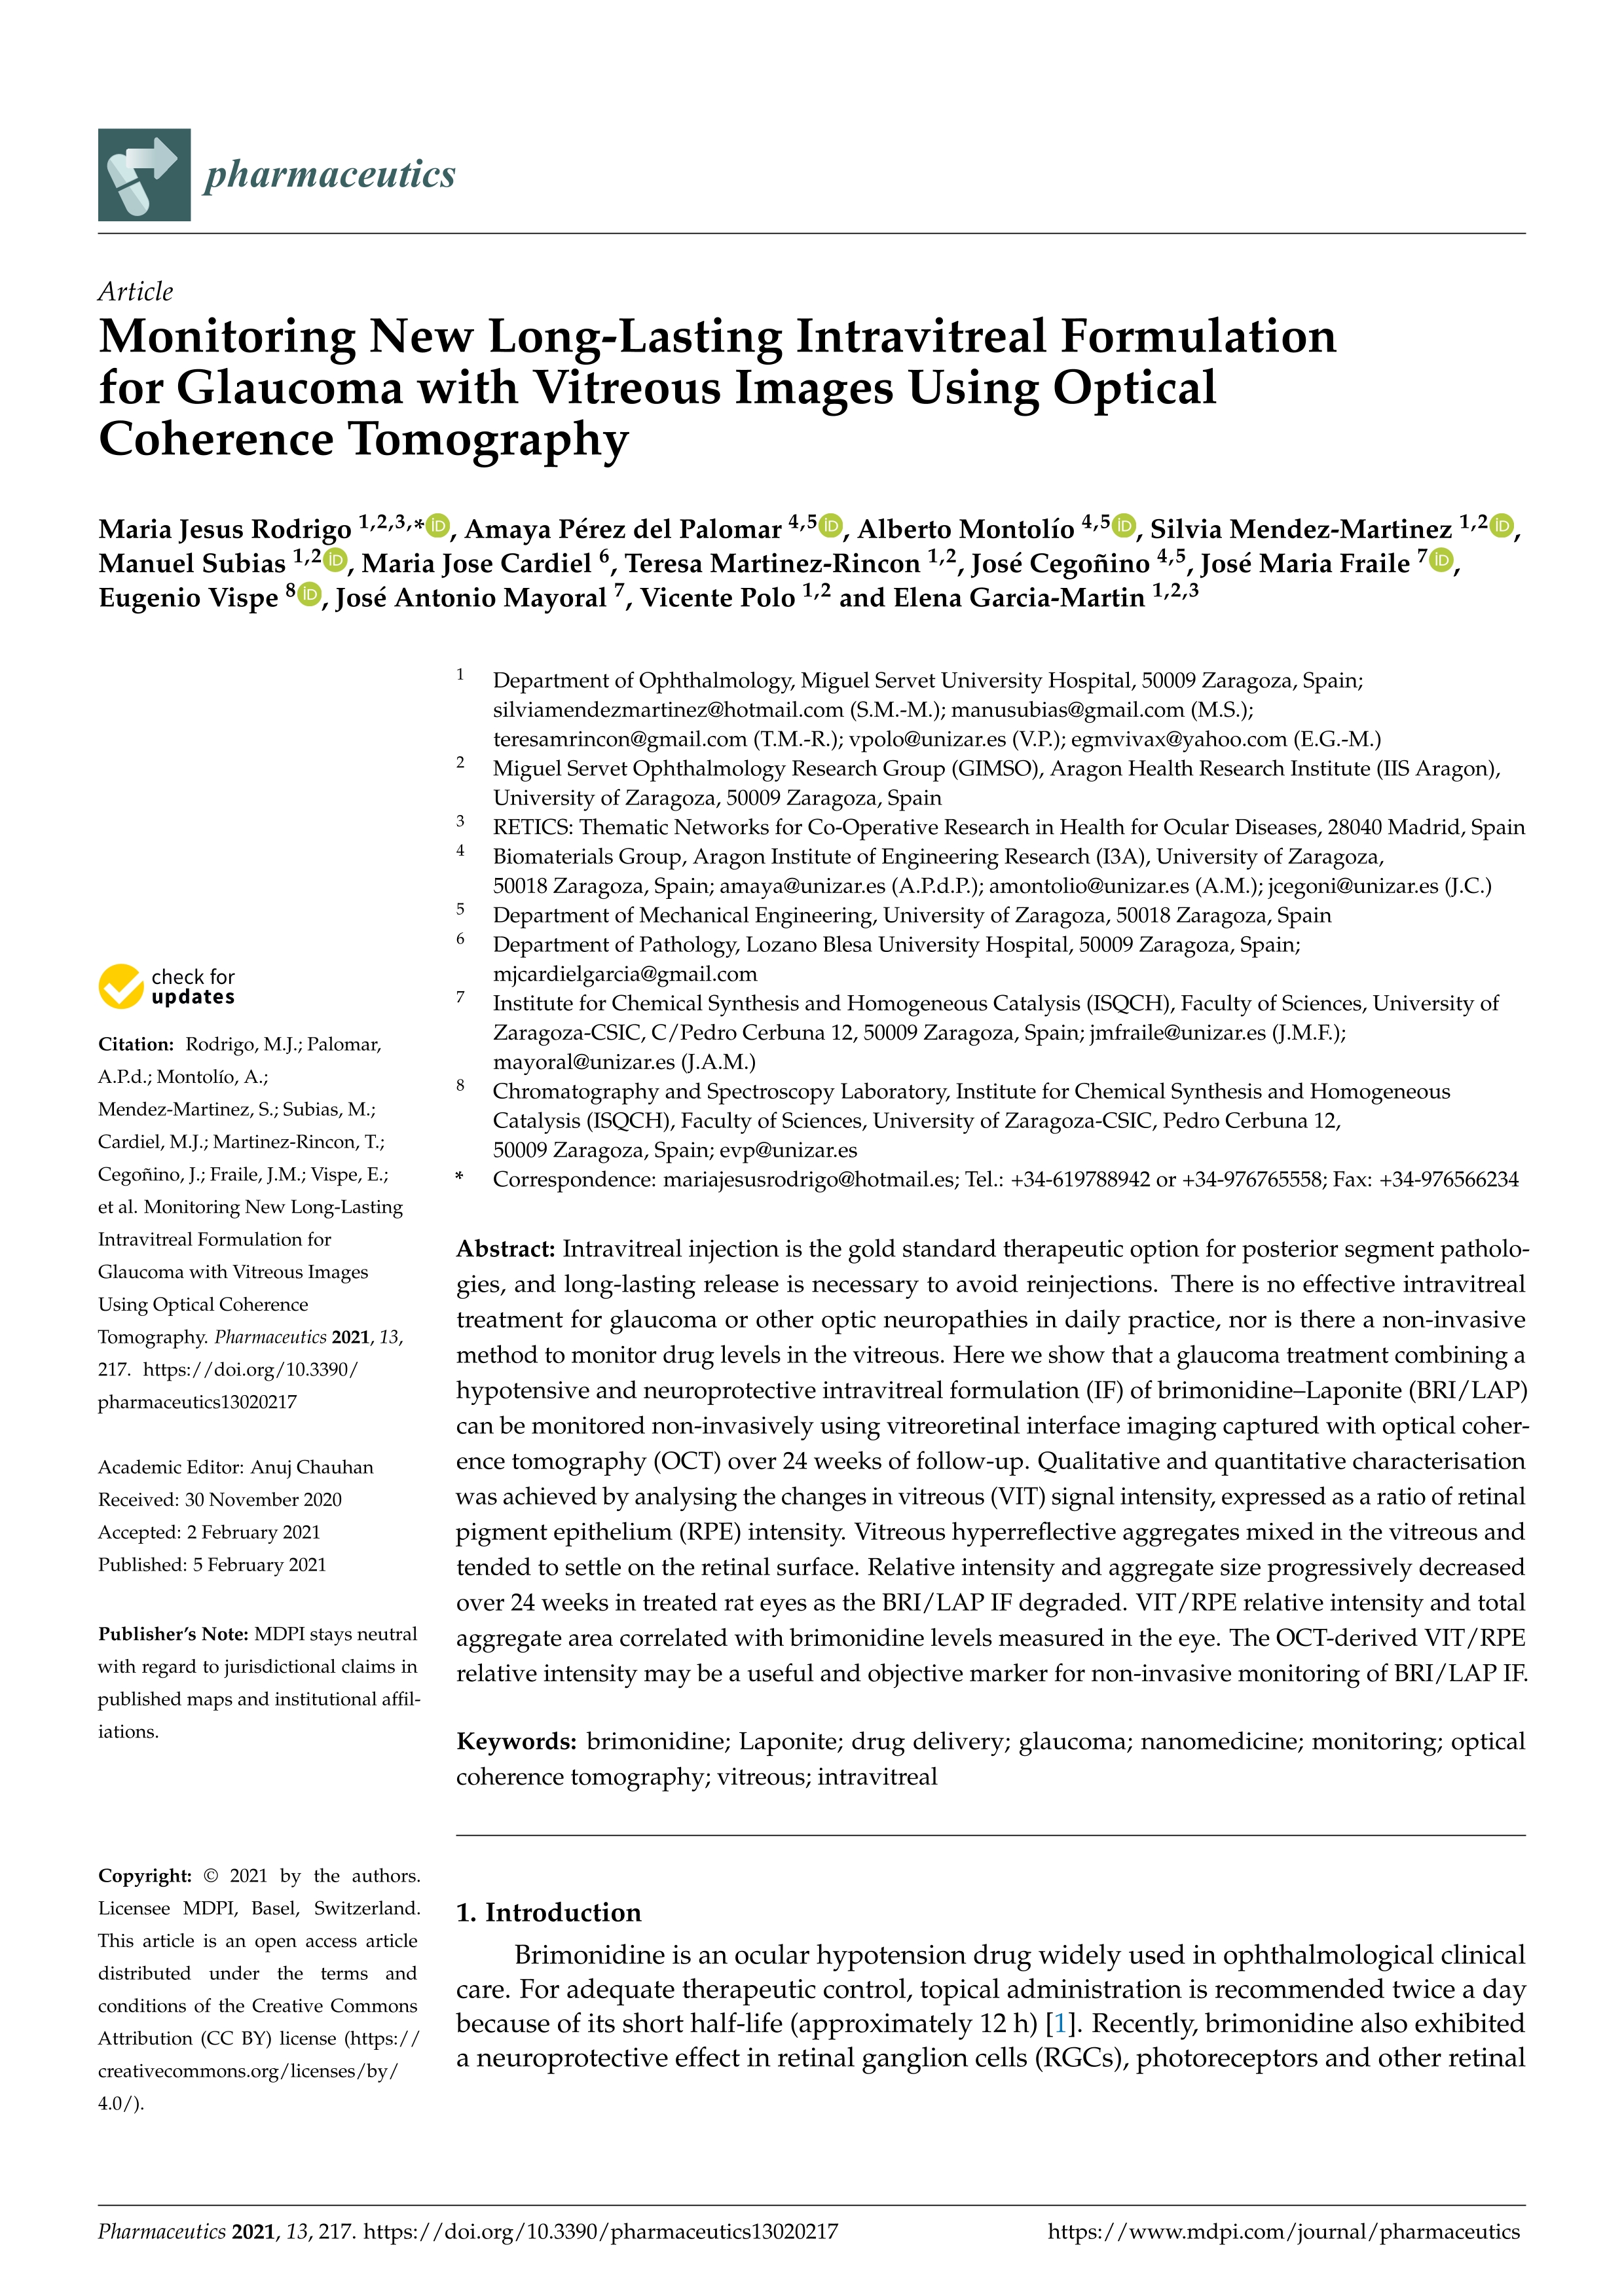 Monitoring new long-lasting intravitreal formulation for glaucoma with vitreous images using optical coherence tomography